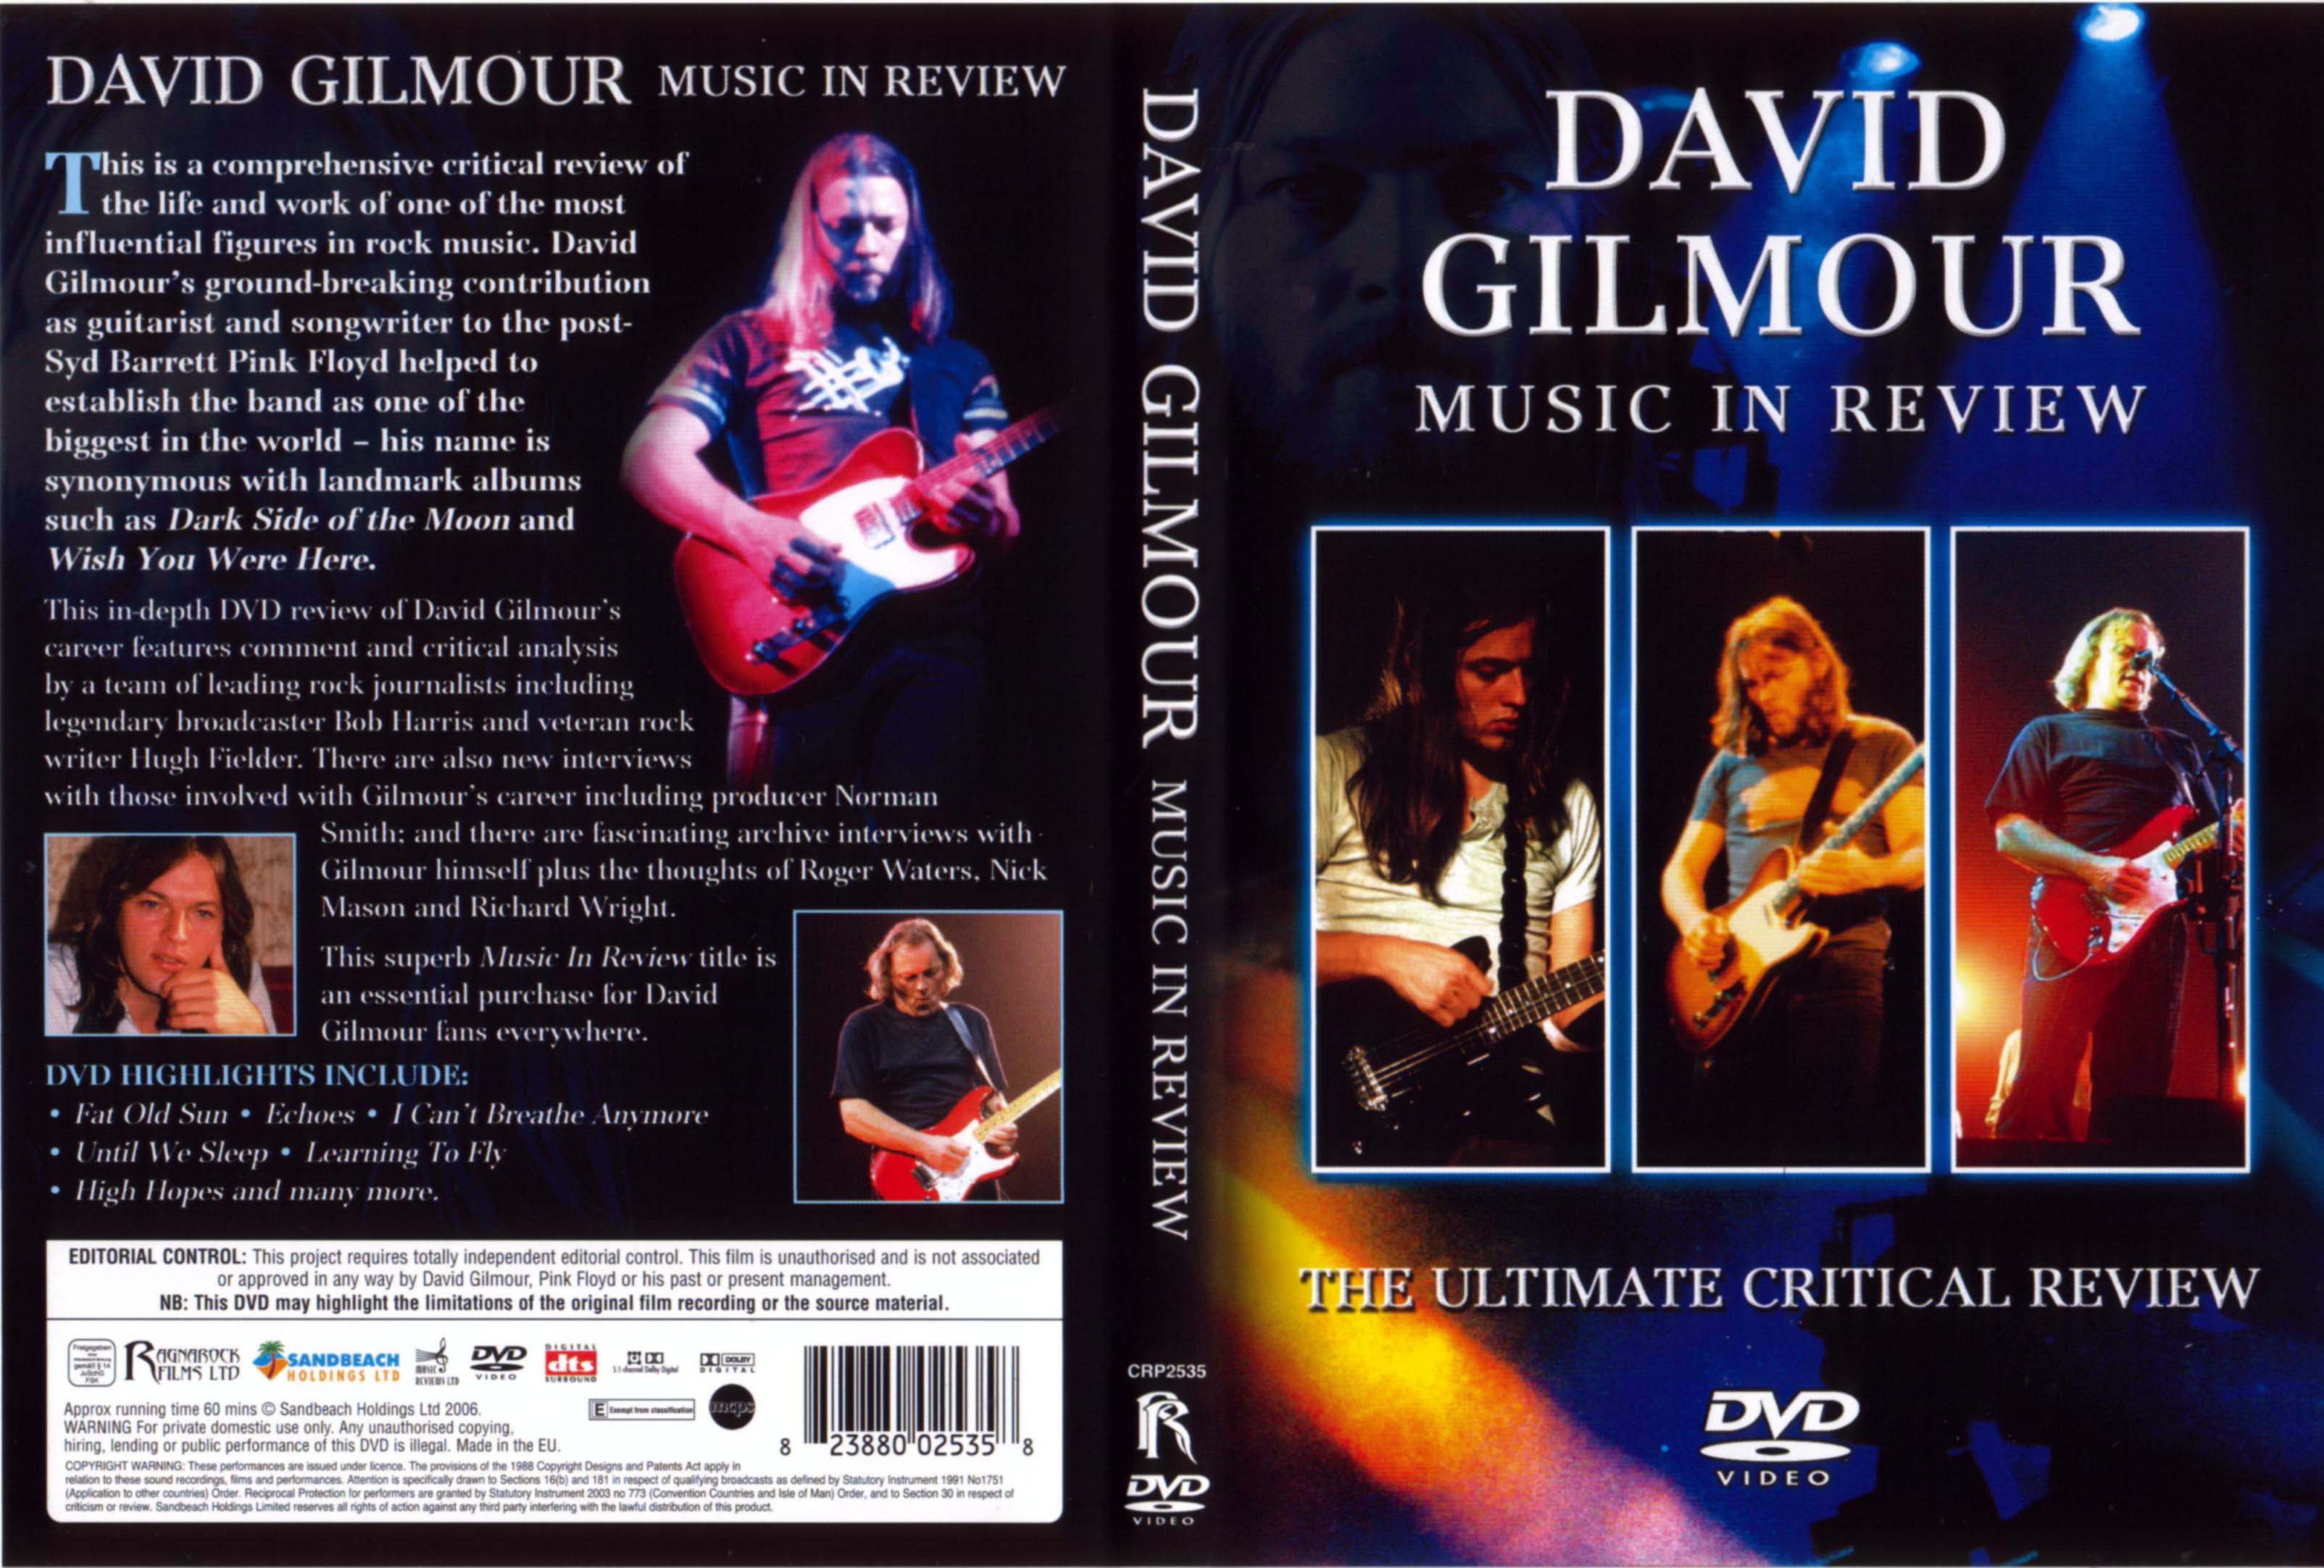 Jaquette DVD David Gilmour Music In Review